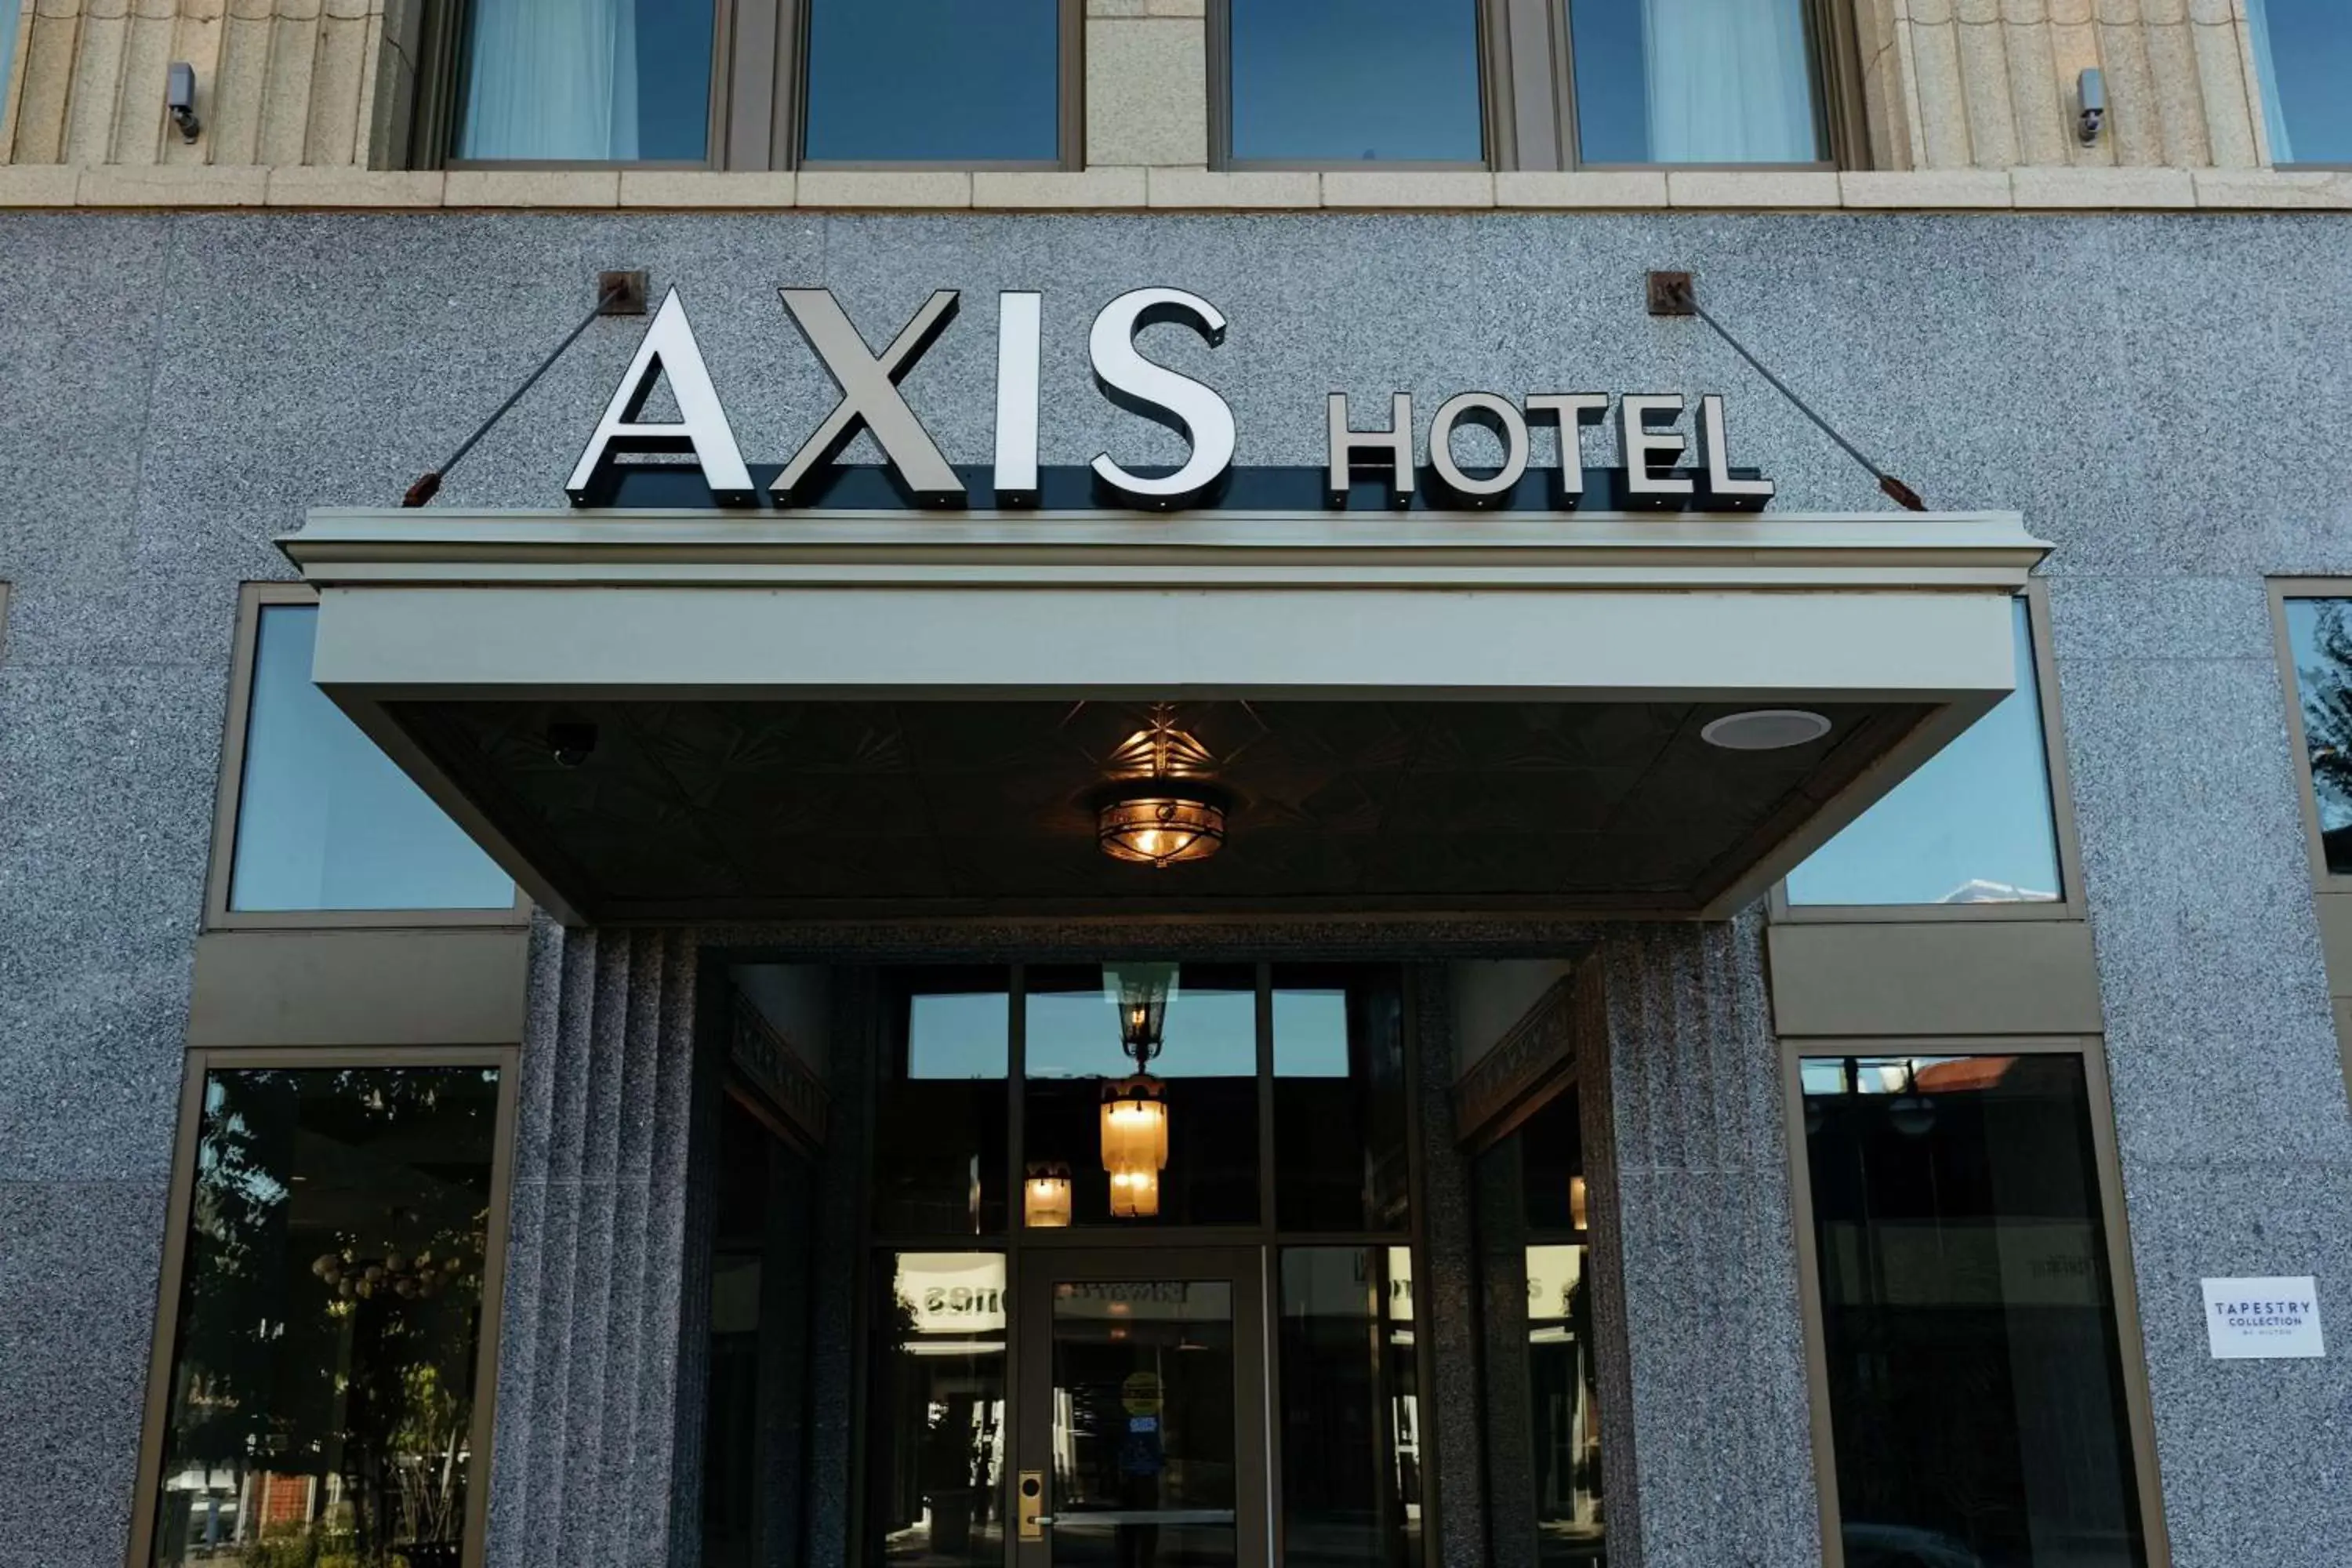 Property building in The Axis Moline Hotel, Tapestry Collection By Hilton